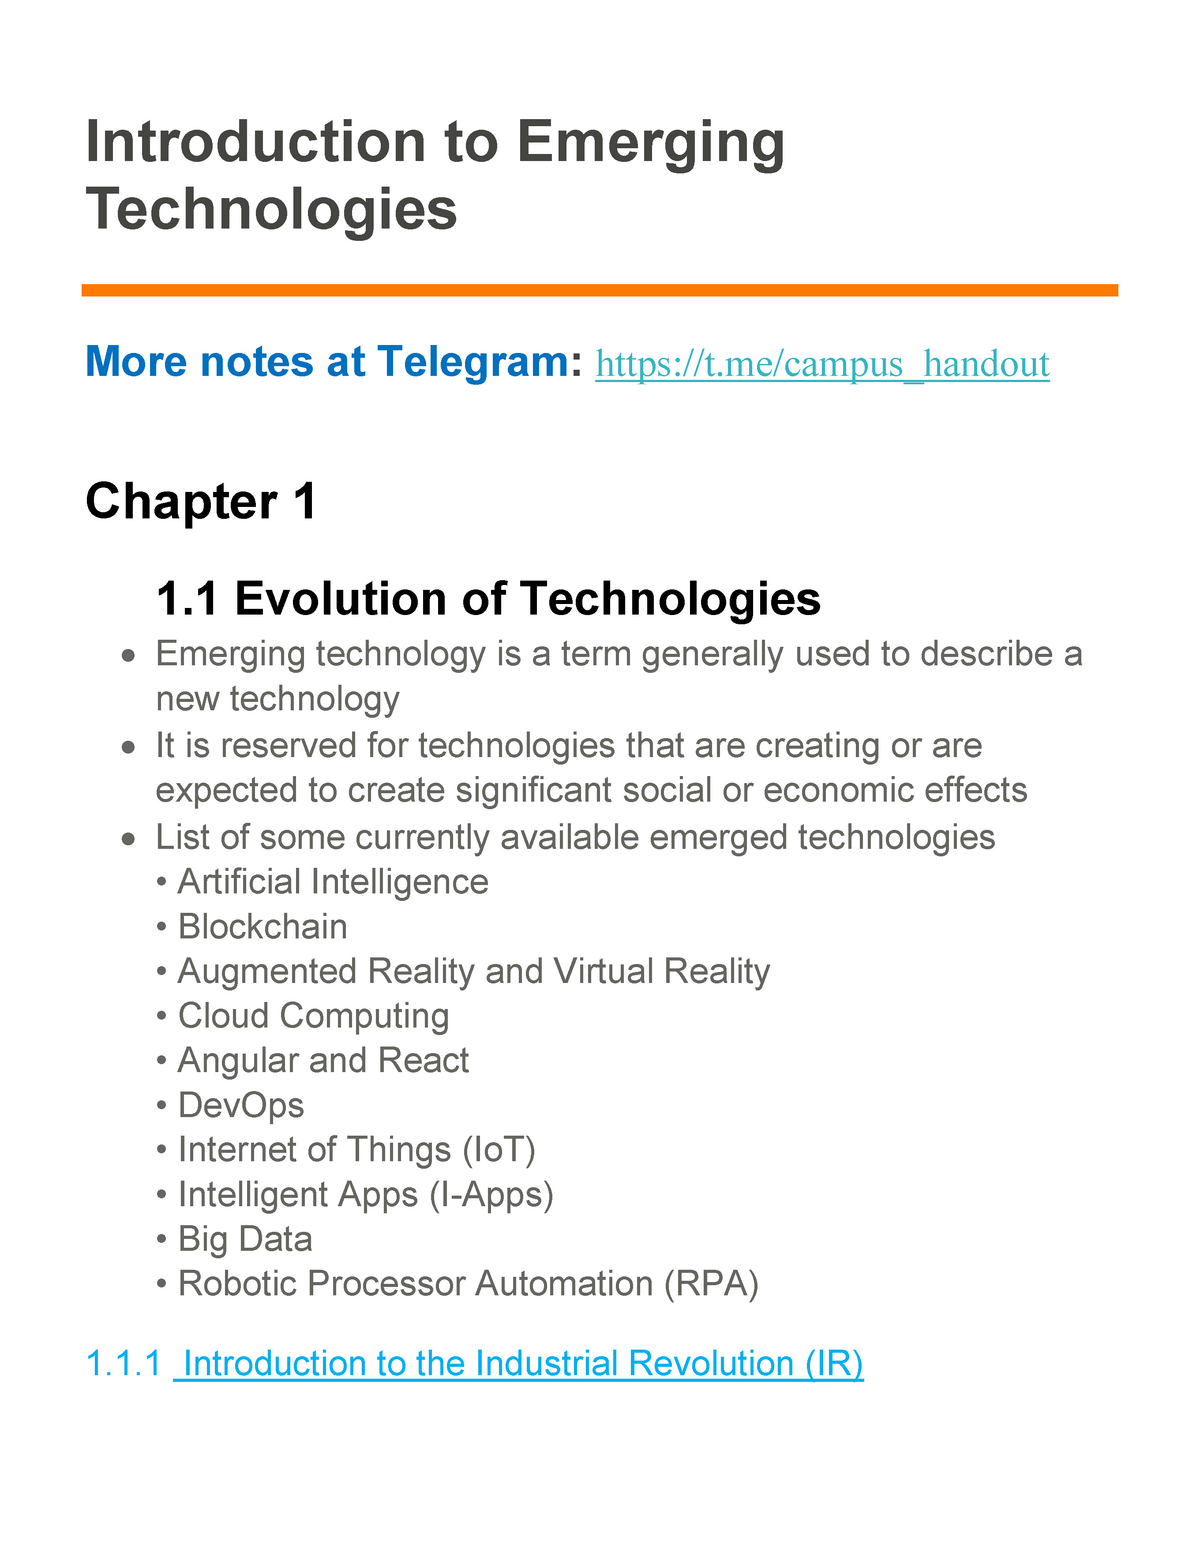 thesis on emerging technologies